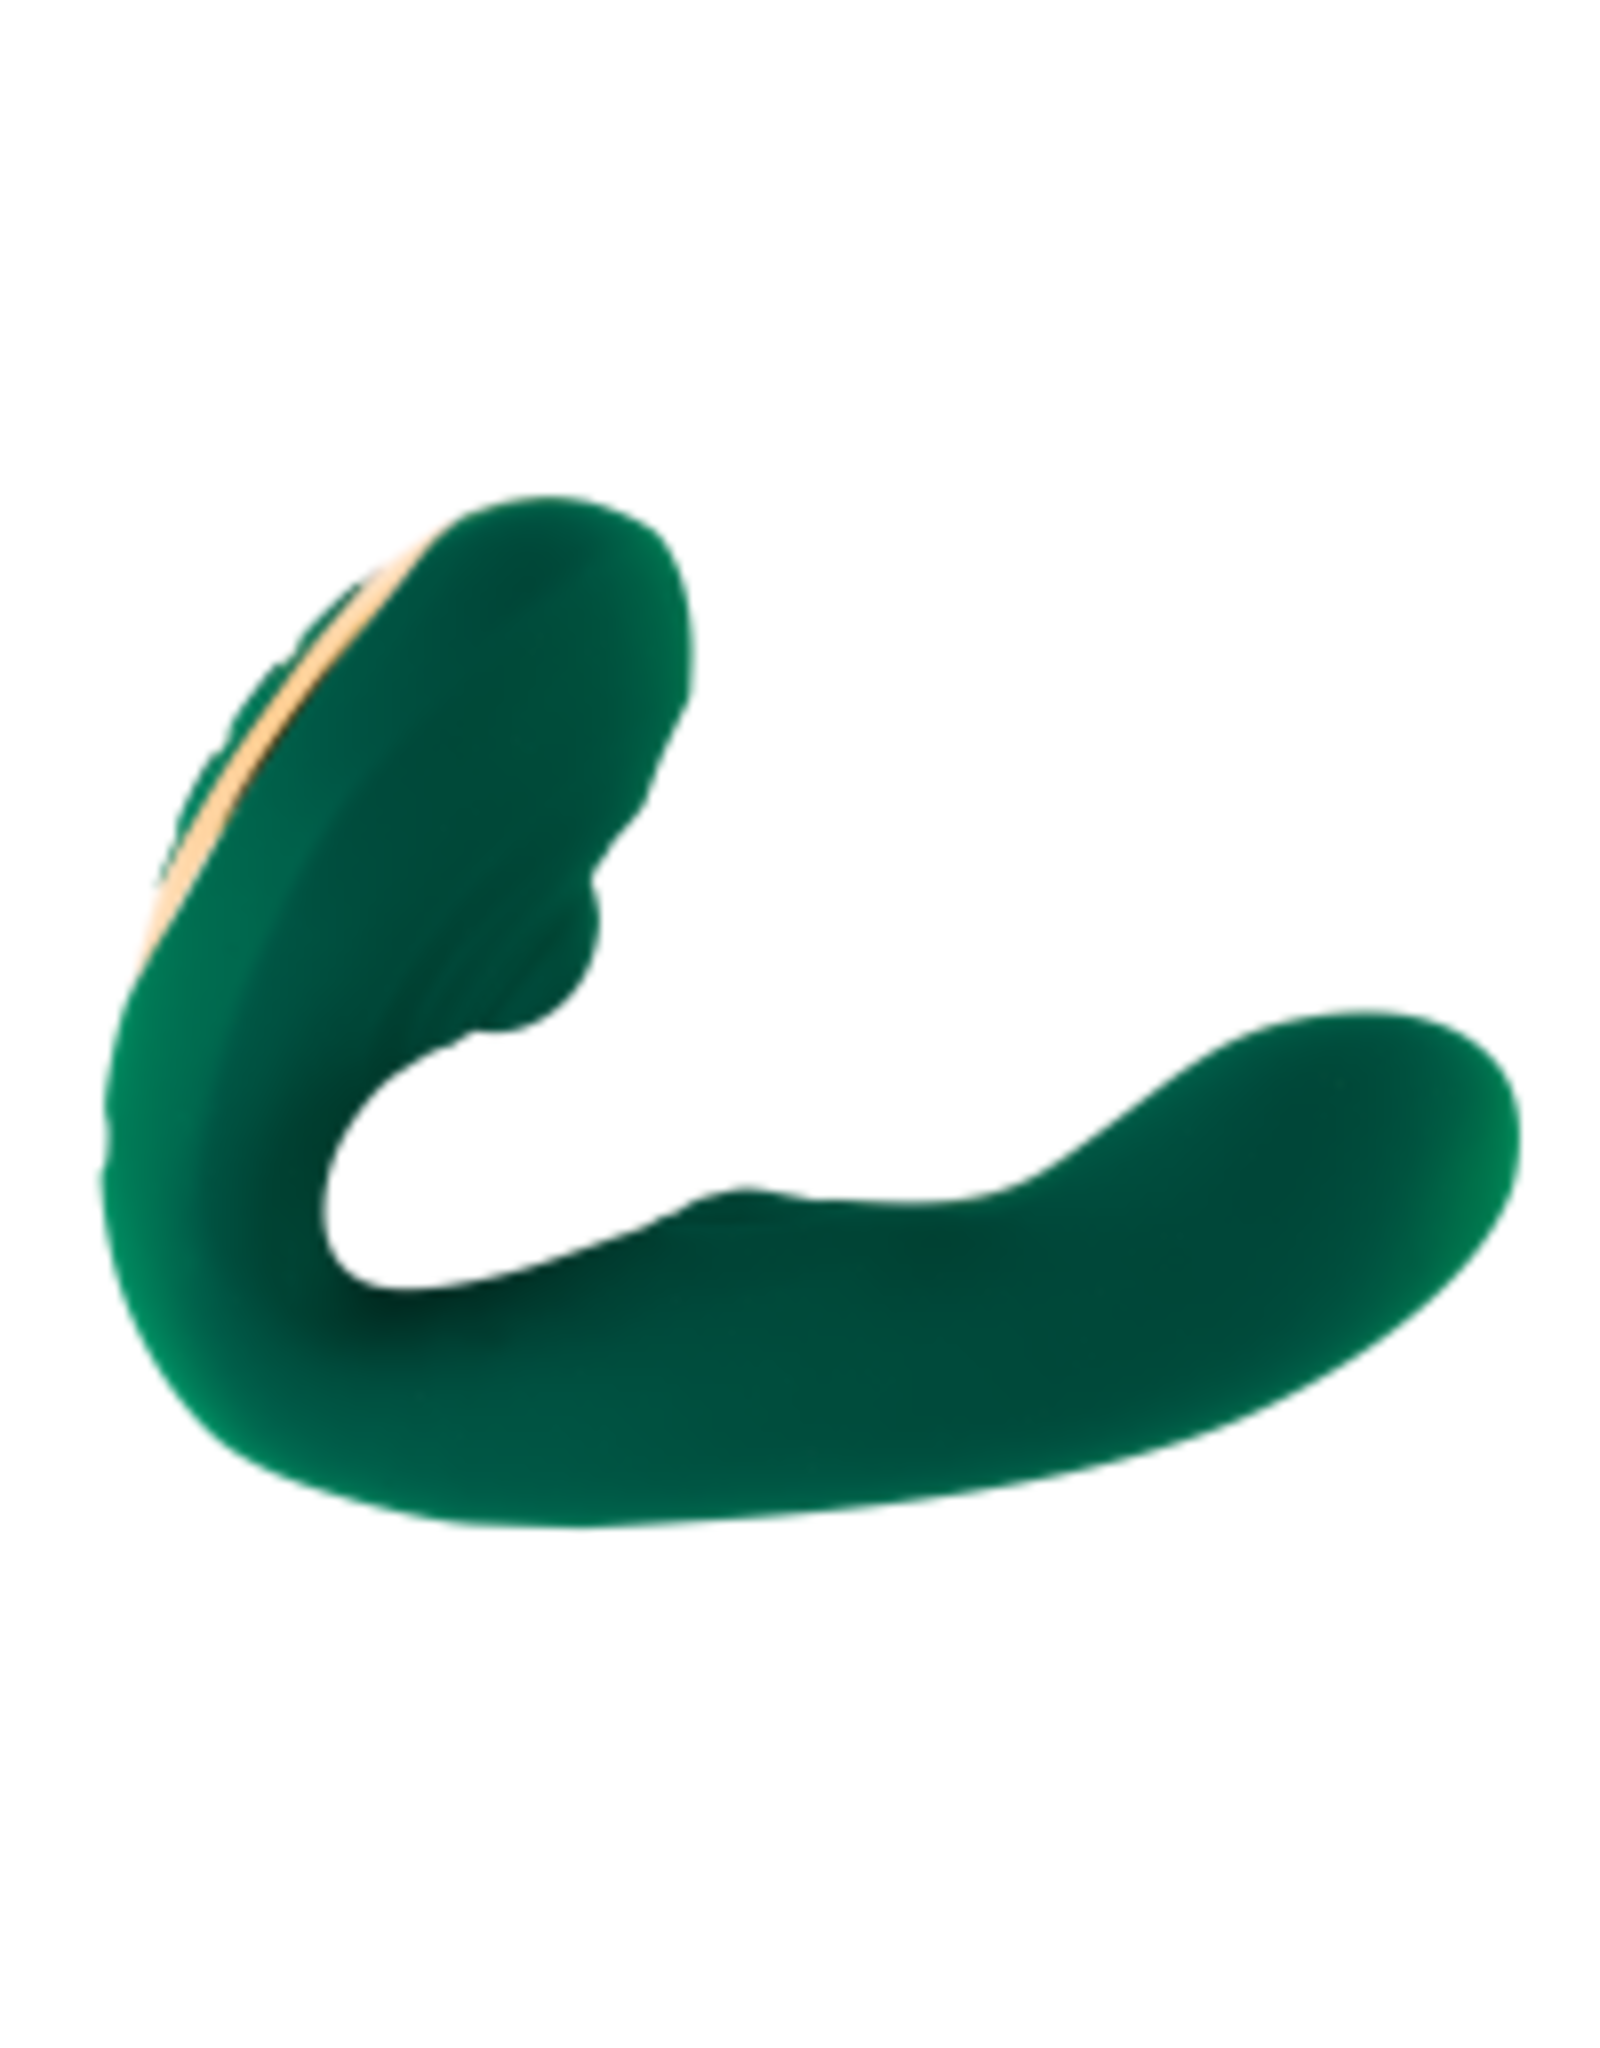 Tracy's Dog Tracy’s Dog - Cobra Spherical Flapping Vibrator - Green